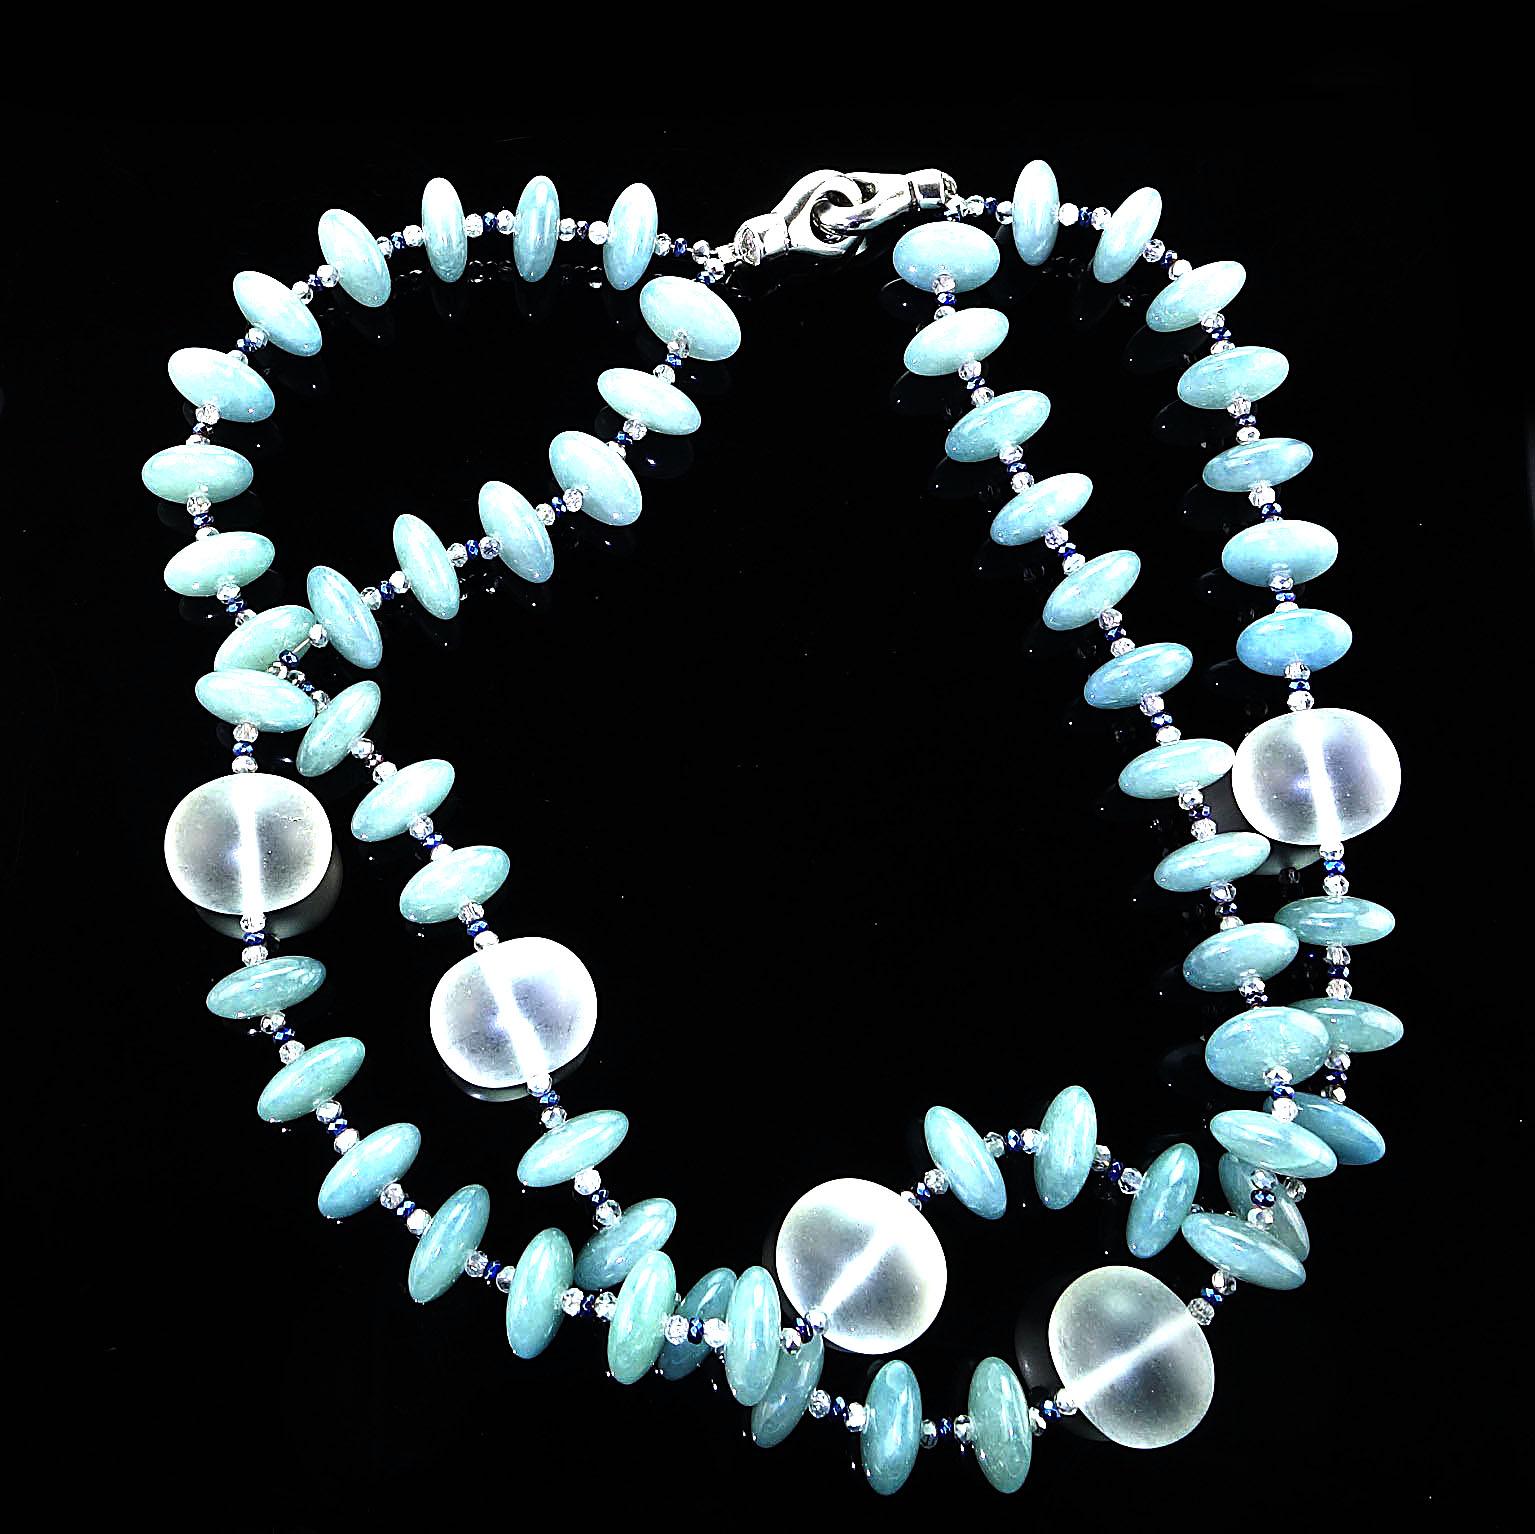 Translucent Sea blue Rondelles (11mm) of Aquamarine accented with Frosted Quartz Crystal (22mm) globes double strand necklace. This stylish necklace also features faceted blue and silver crystals to accent the Aquamarine rondelles. The necklace is